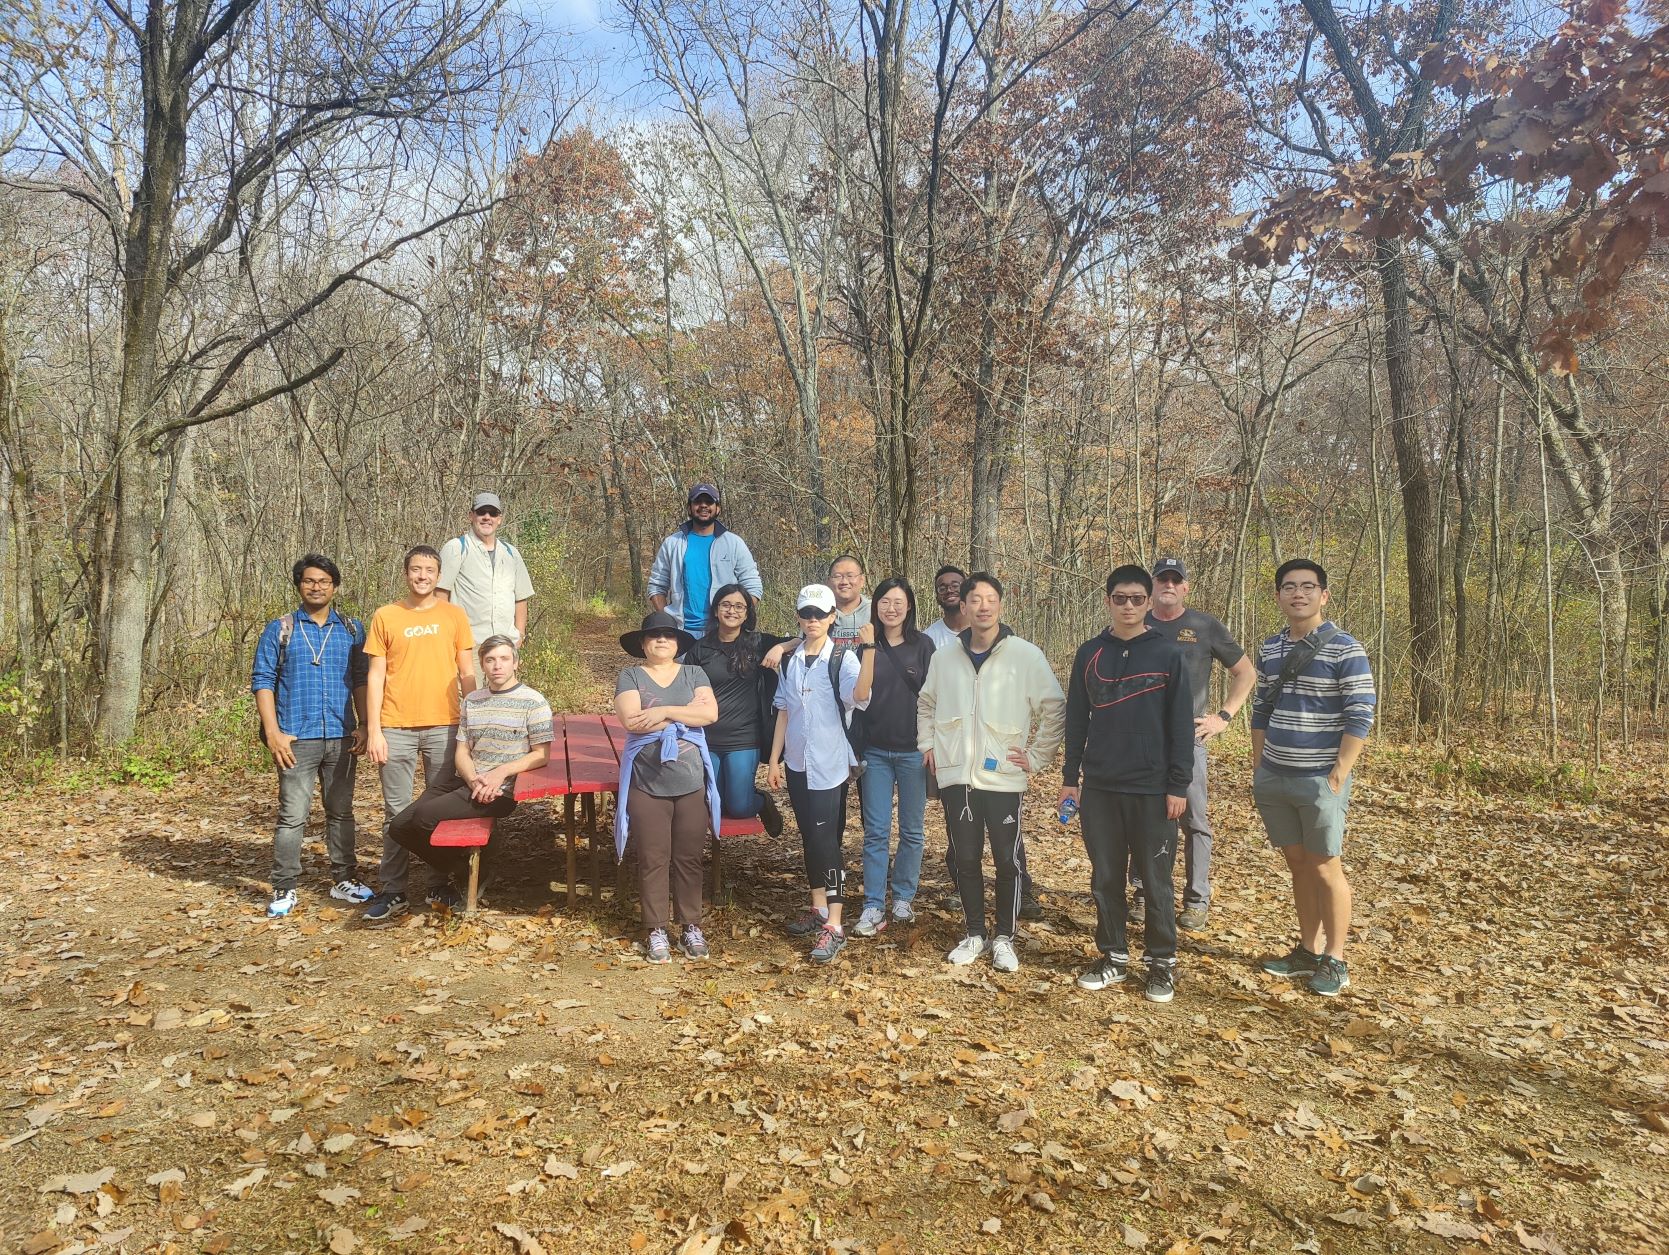 Statistics graduate students and faculty enjoying a hike.